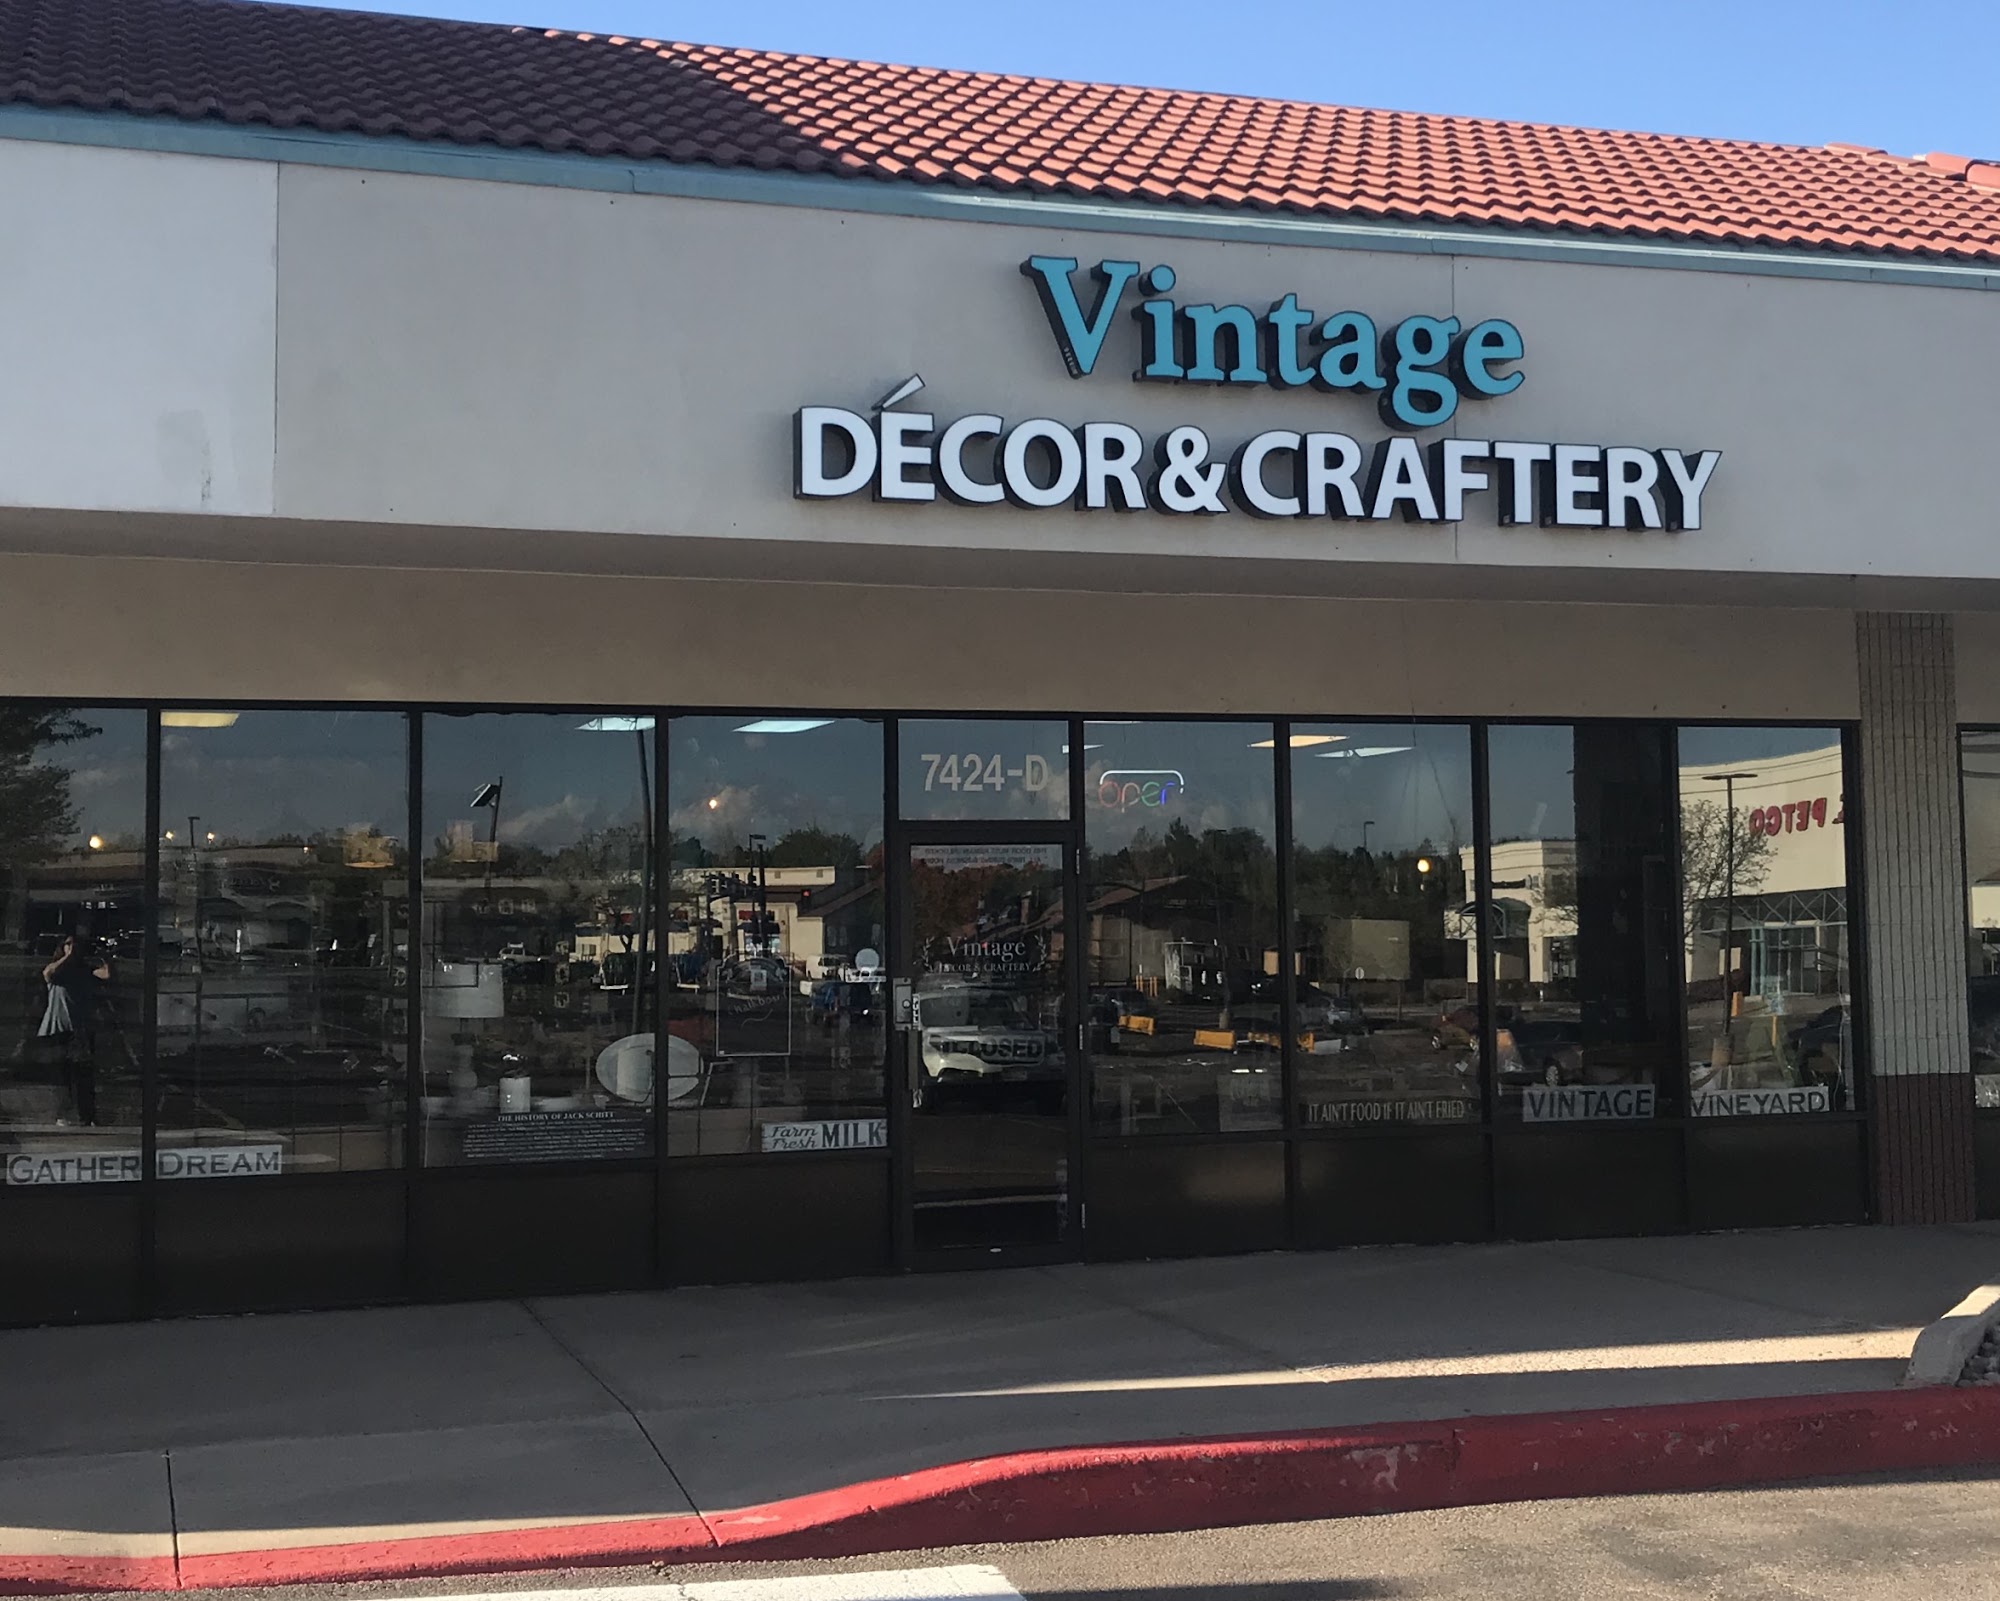 Vintage Decor & Craftery - Located in Heart and Home